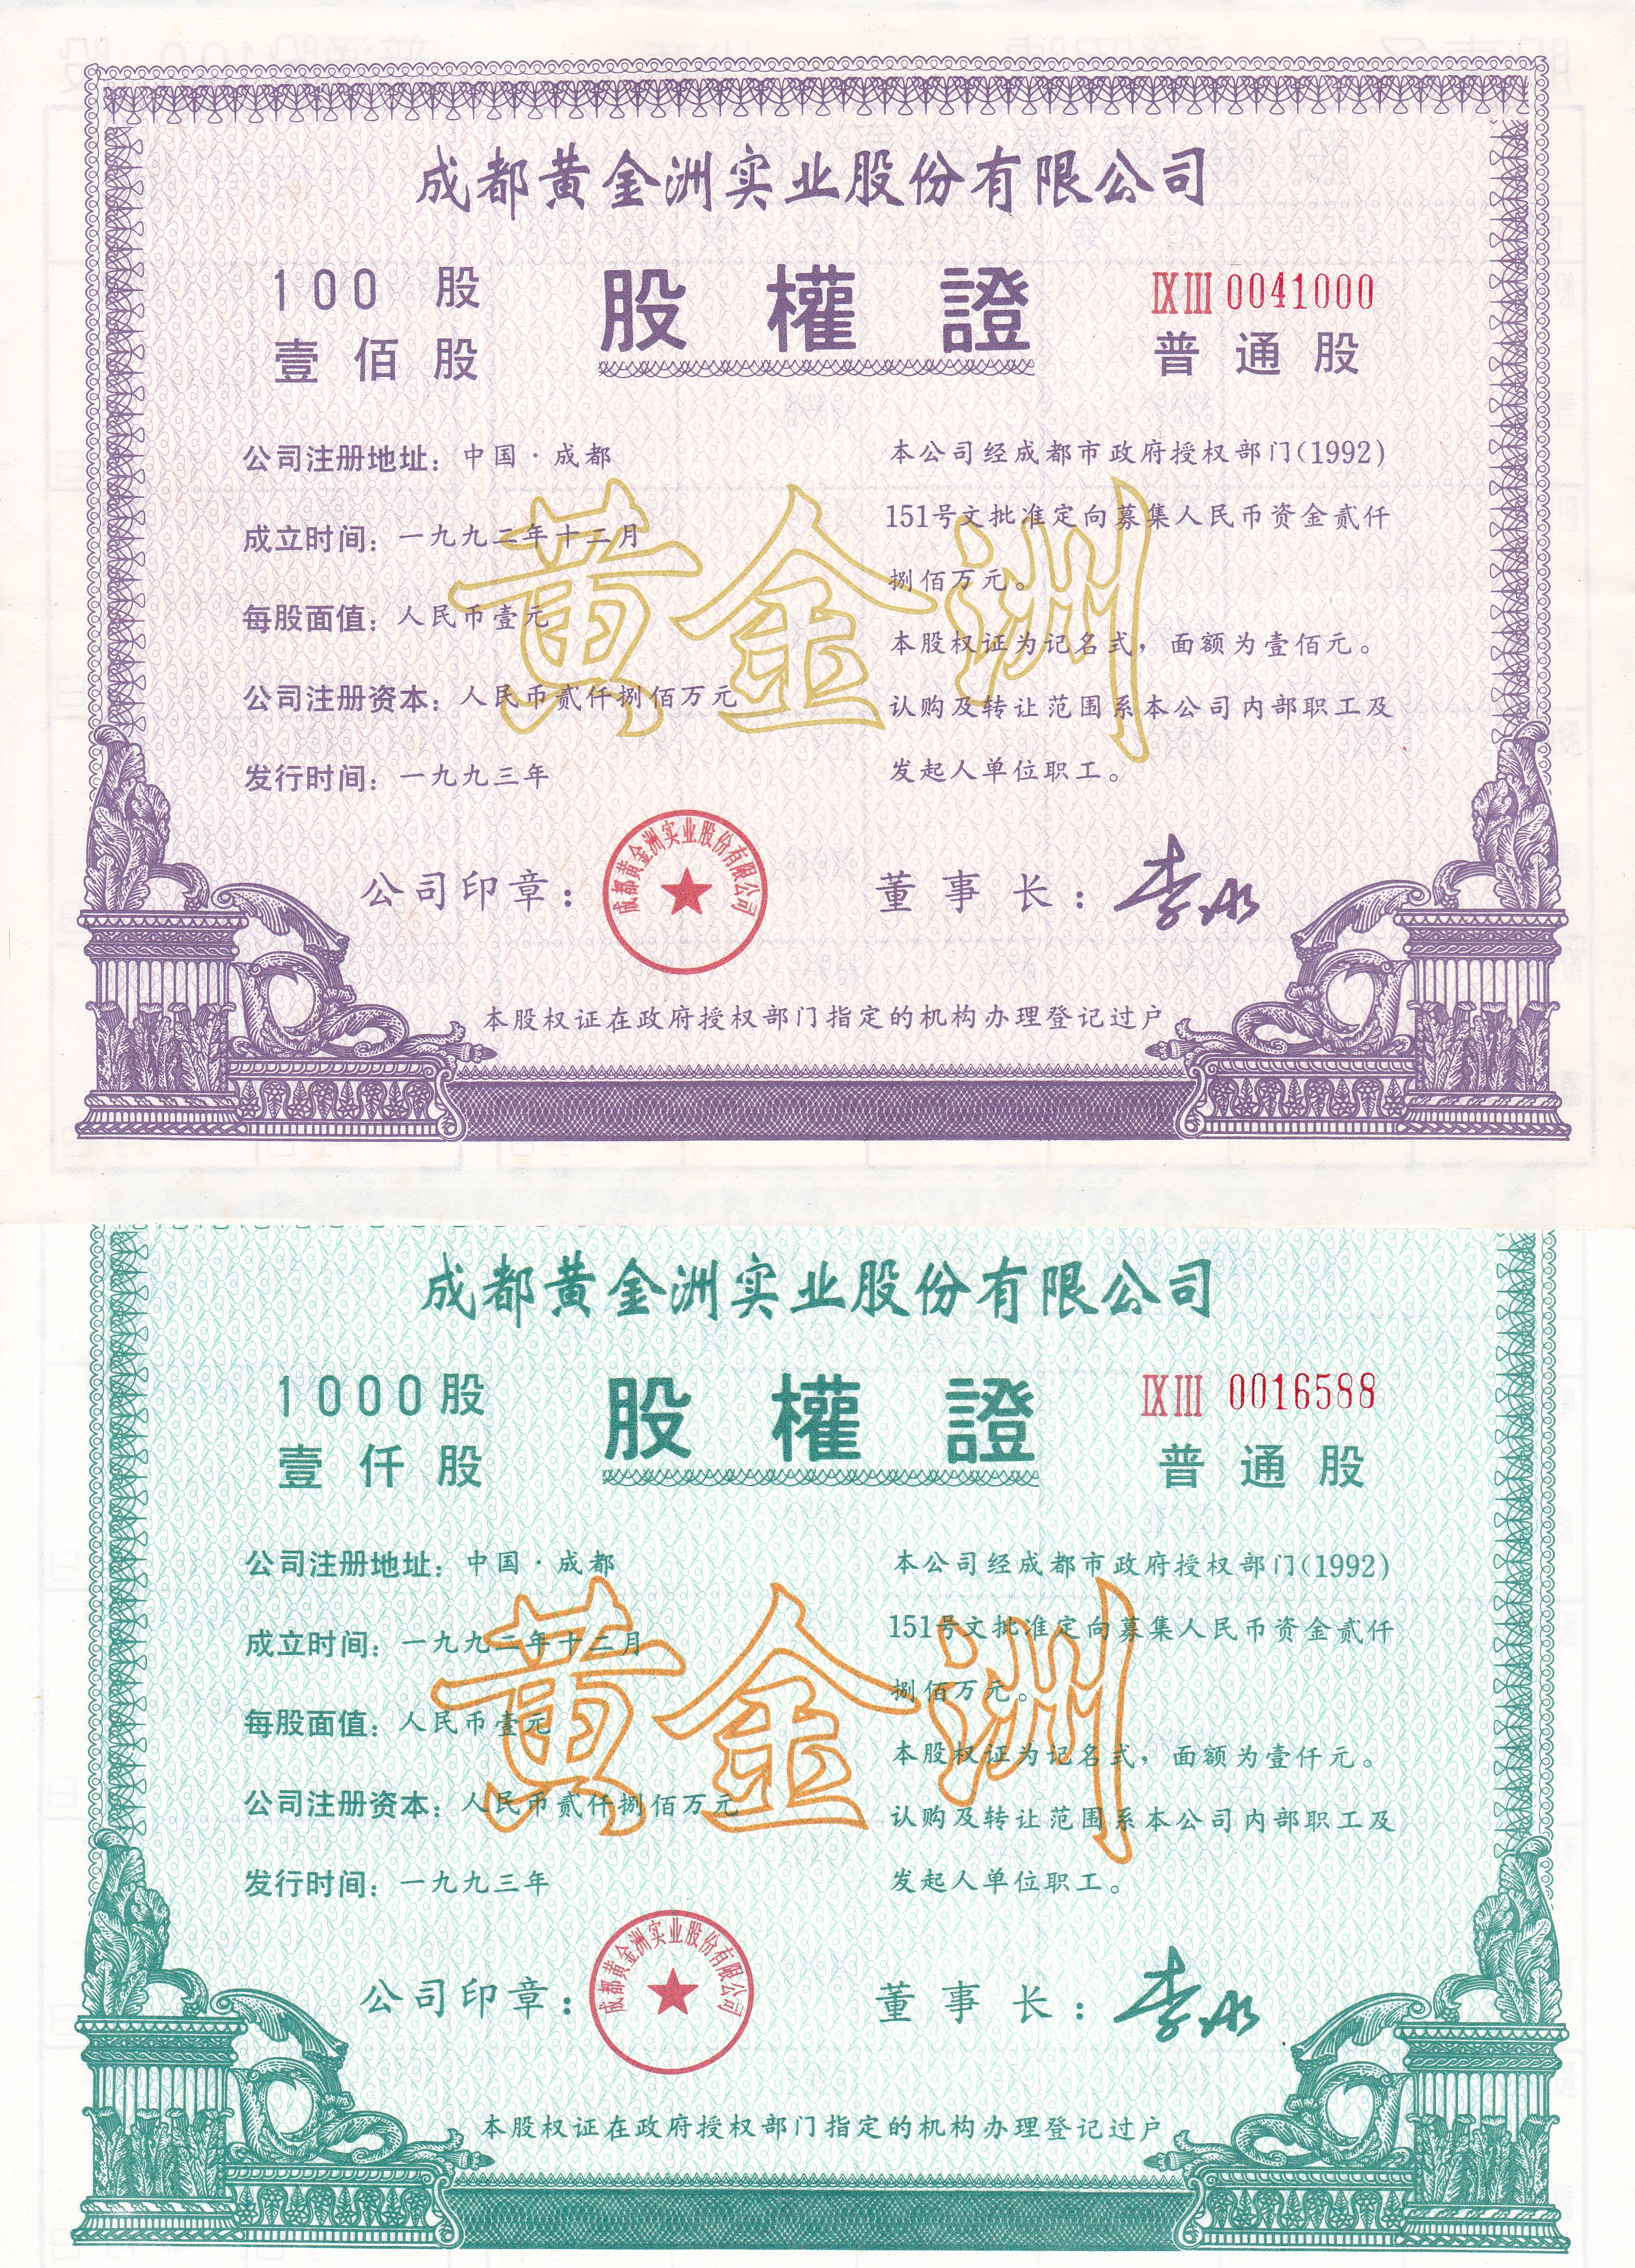 S3250, Chendu Gold Industrial Co. Stock Certificate of 2 Pcs, China 1992